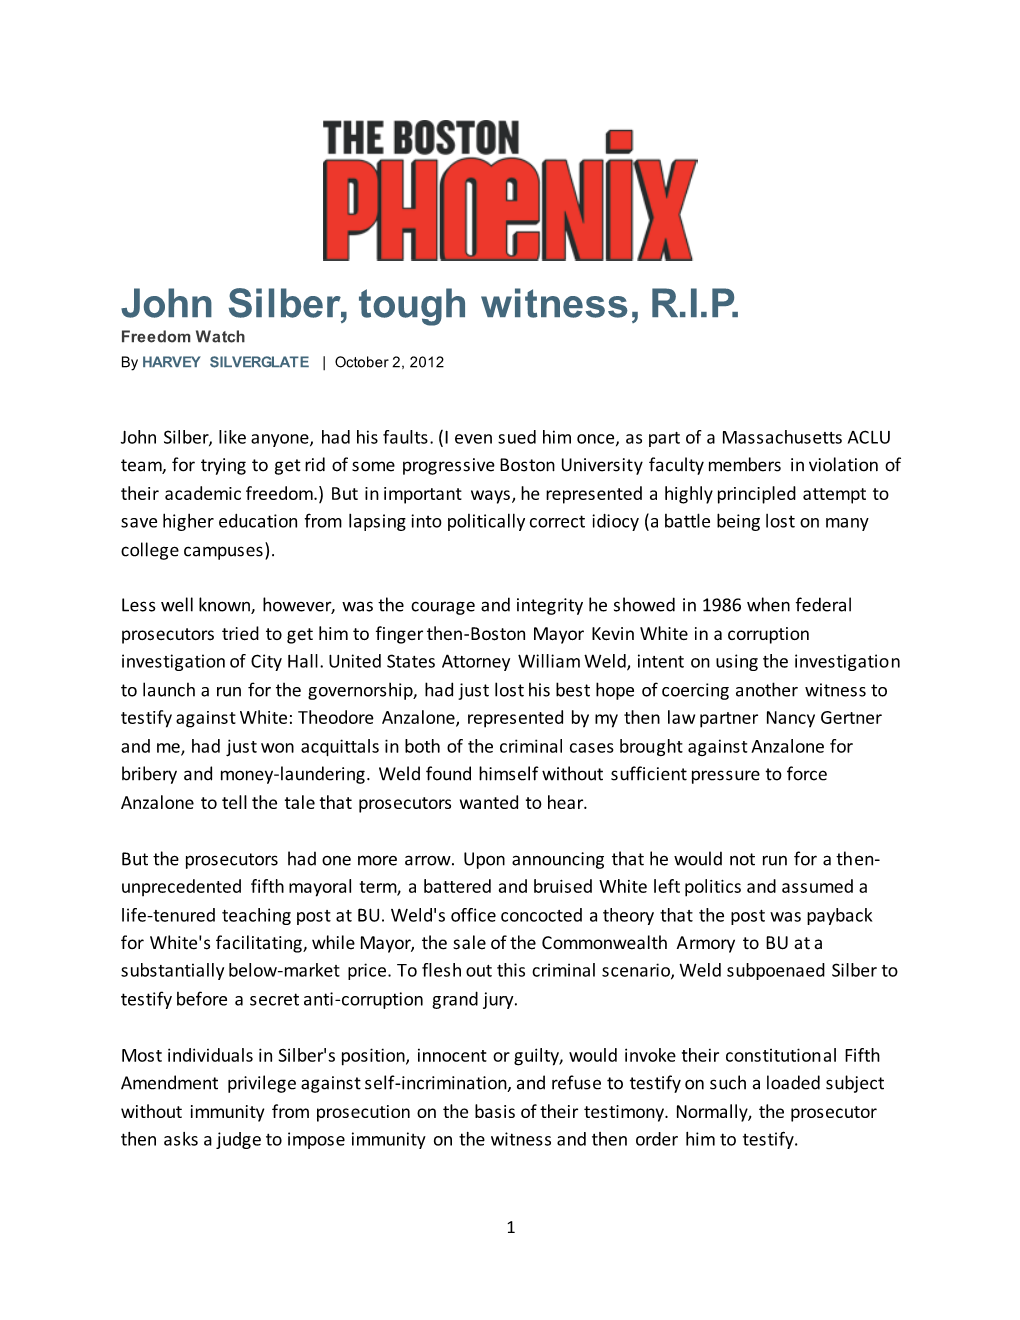 John Silber, Tough Witness, R.I.P. Freedom Watch by HARVEY SILVERGLATE | October 2, 2012